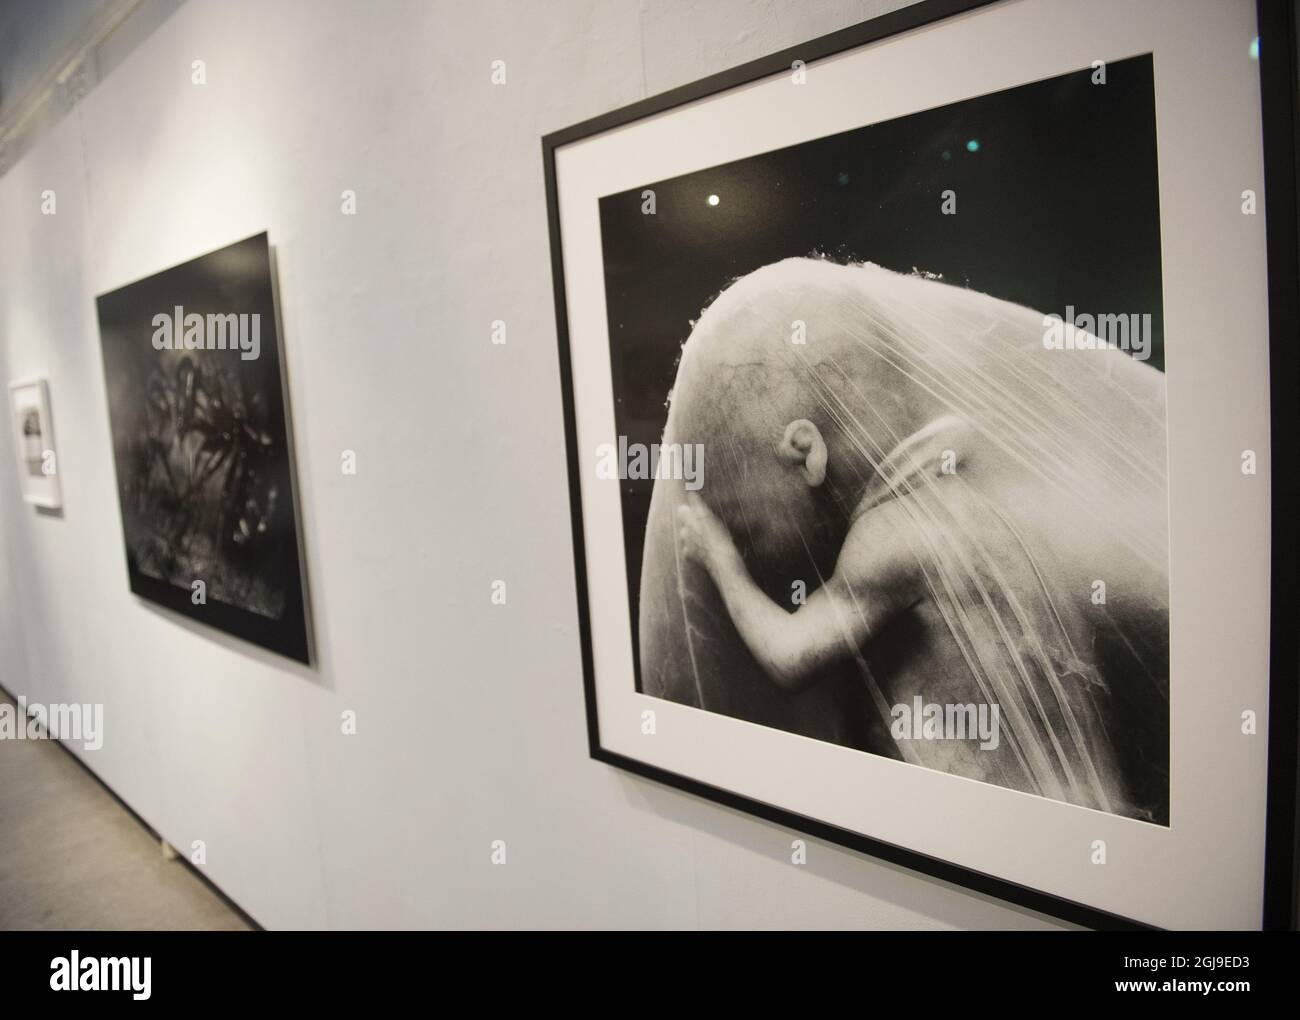 STOCKHOLM 2015-09-30 The opening of world famous photographer Lennart Nilsson , 93, exhibition Â”A Child is Born' at the Galley Contrast in Stockholm, Sweden, September 30, 2015. The exhibition marks the 50th anniversary of the book. Foto: Maja Suslin / TT / Kod 10300  Stock Photo